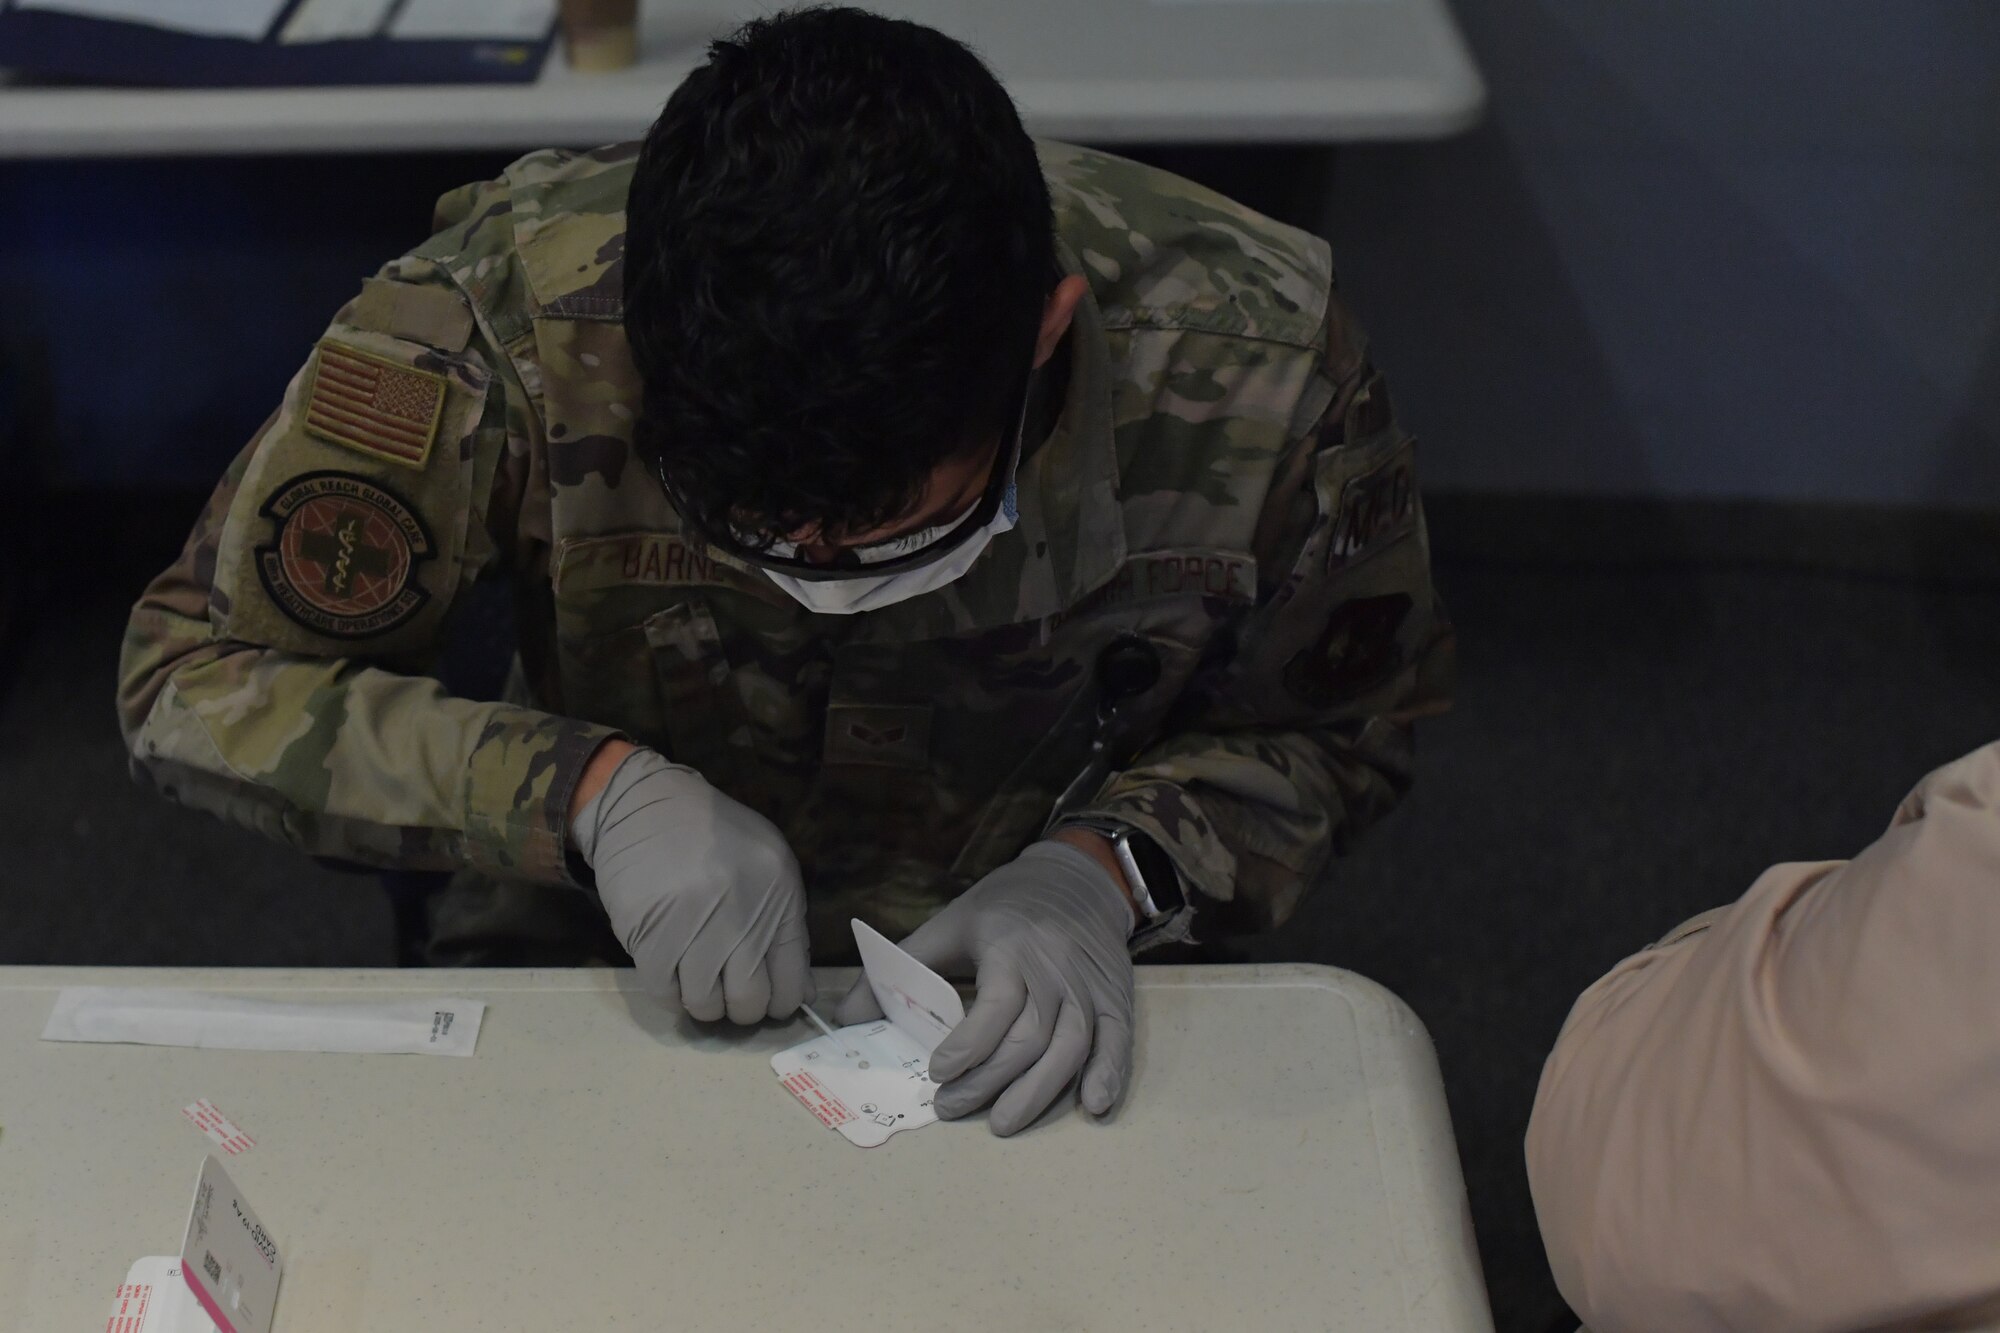 U.S. Air Force Senior Airman Marquis Barney, 86th Healthcare Operations Squadron medical technician, conducts a pre-travel COVID-19 test at the Enlisted Club on Ramstein Air Base, Germany, Jan. 28, 2021.